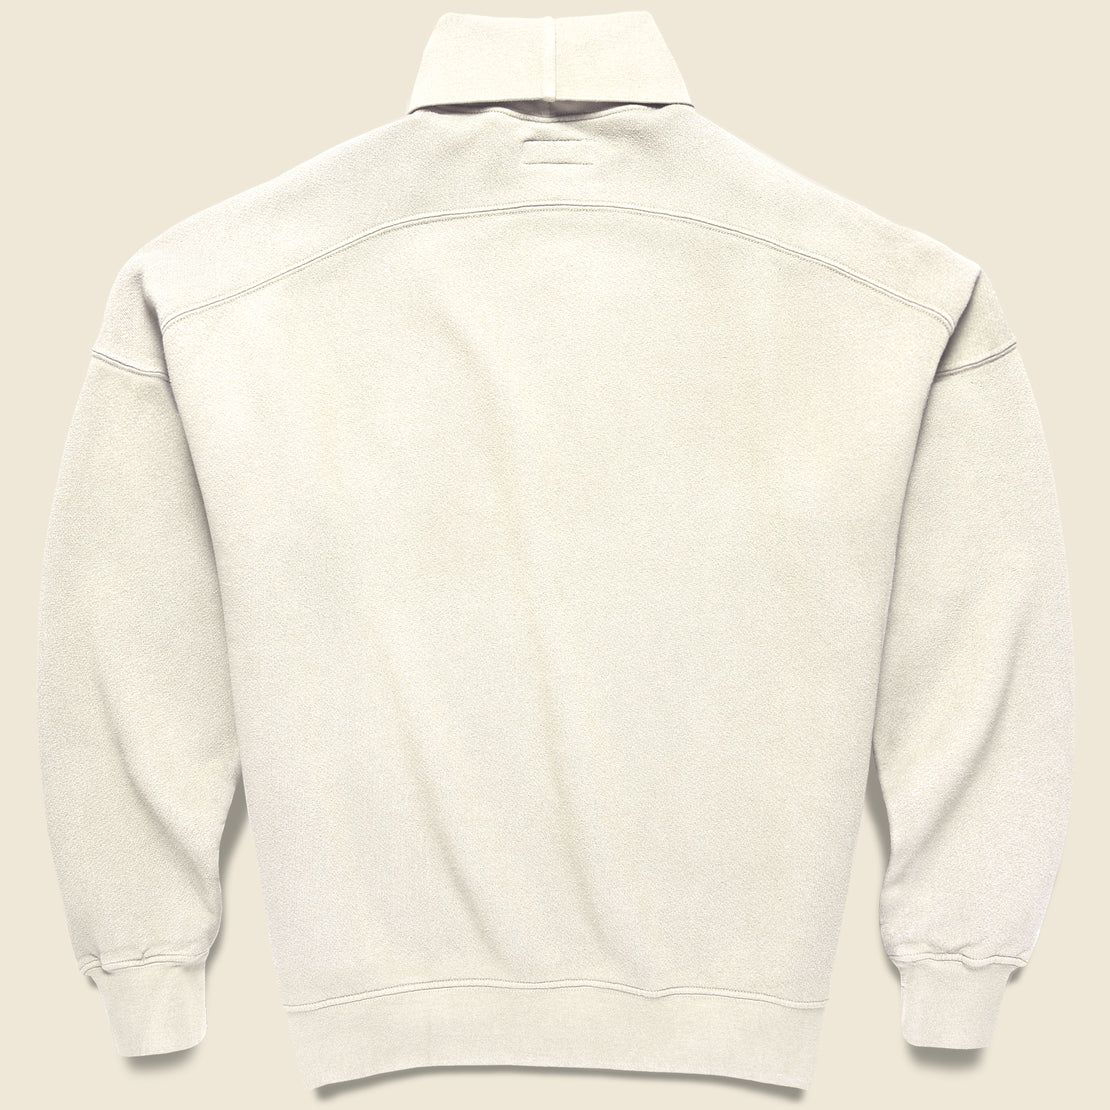 Super Russell Turtleneck - Unbleached Natural - Monitaly - STAG Provisions - Tops - Fleece / Sweatshirt